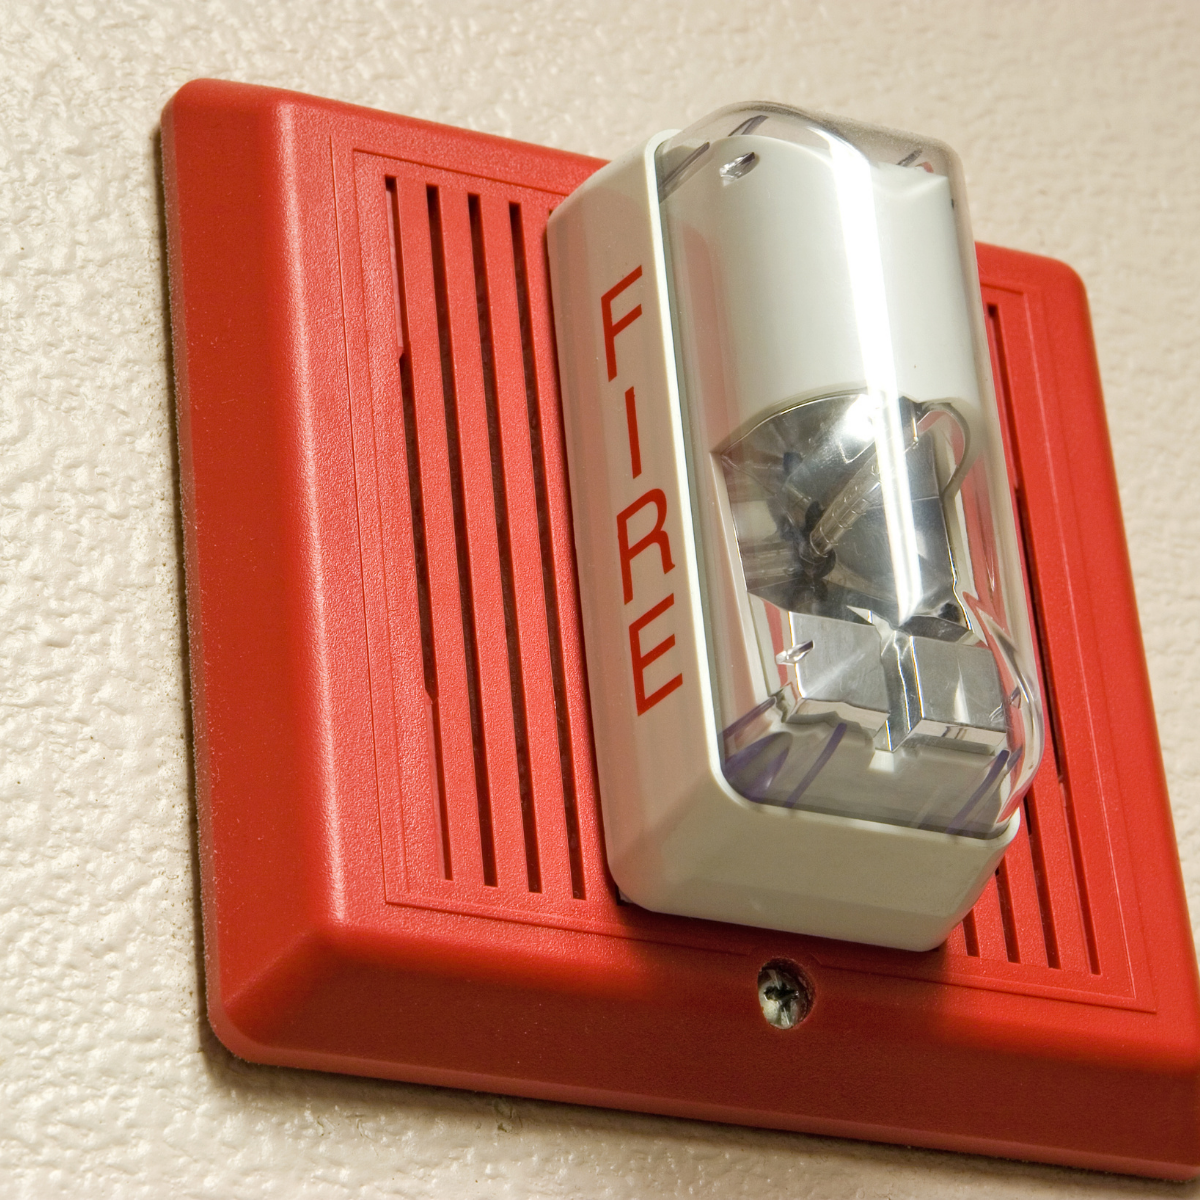 Fire Alarm Installation Safeguarding Lives and Property